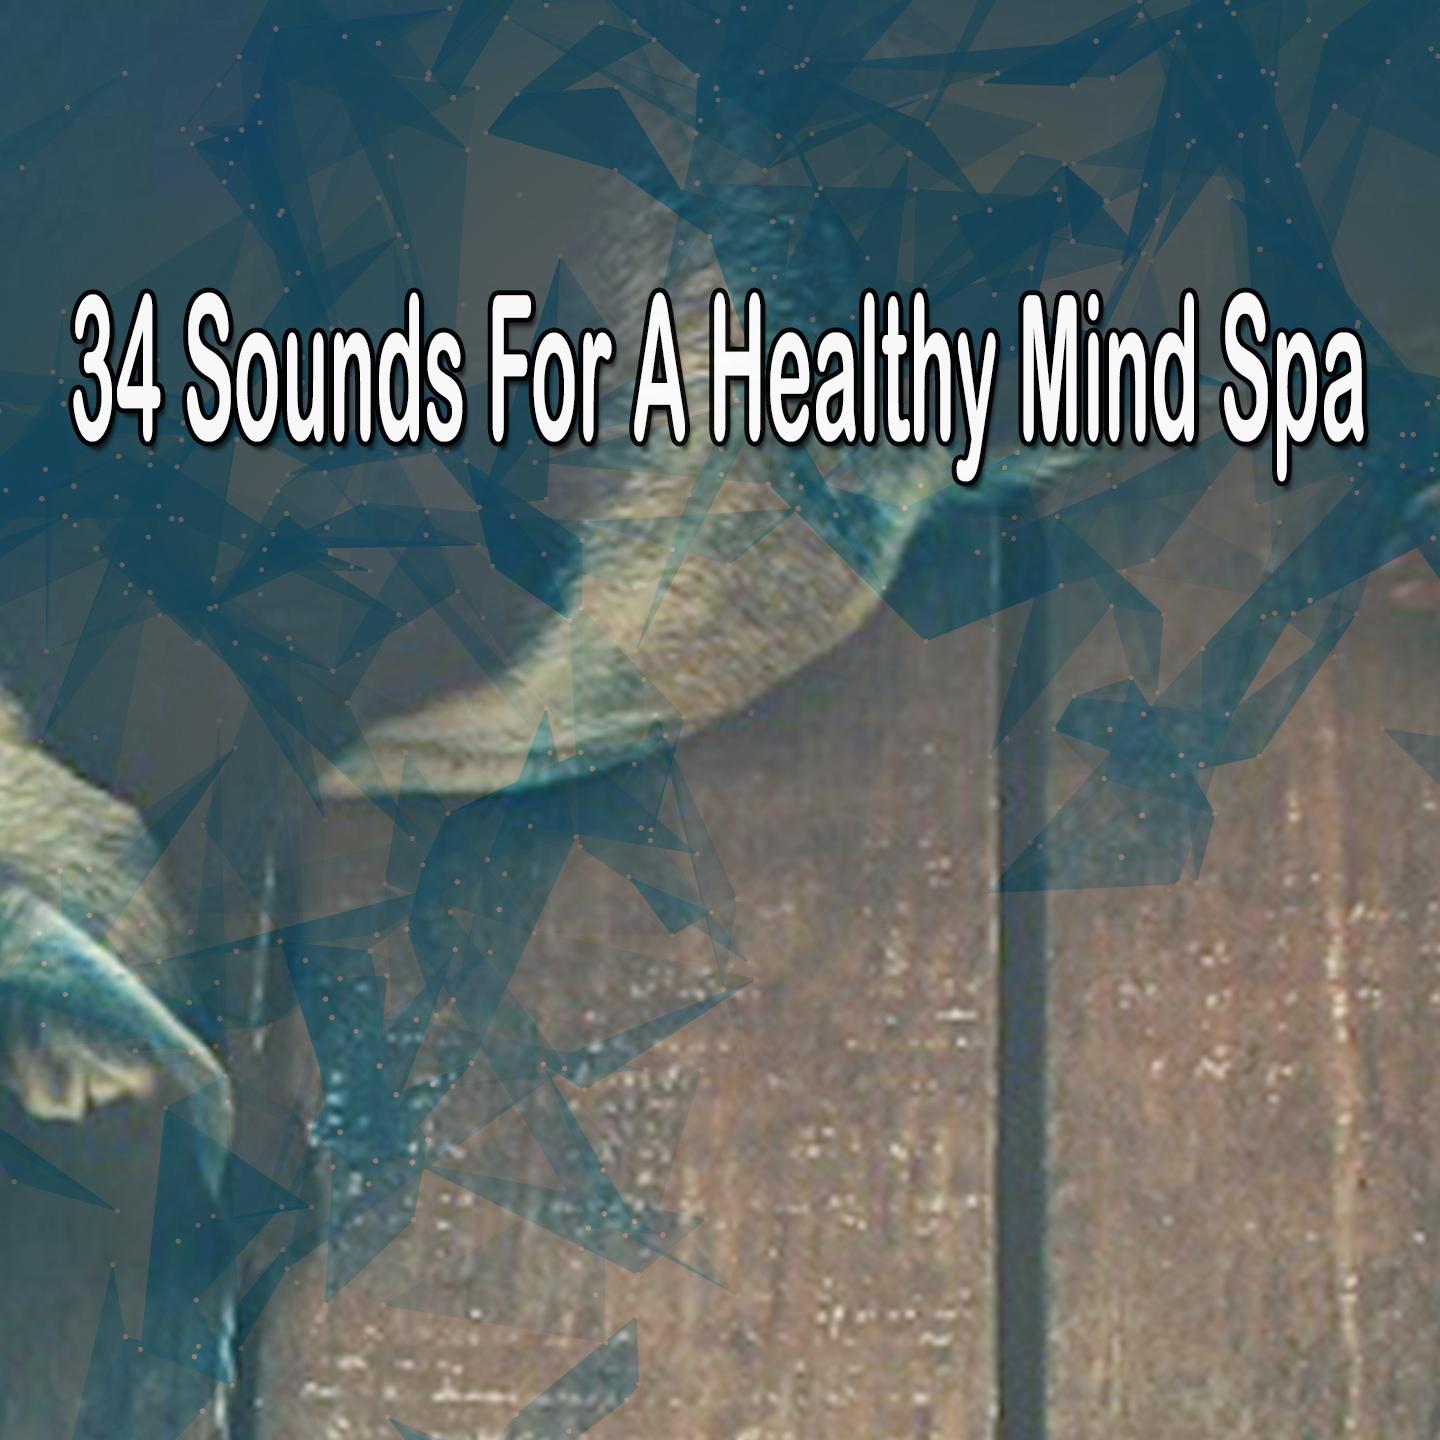 34 Sounds For A Healthy Mind Spa